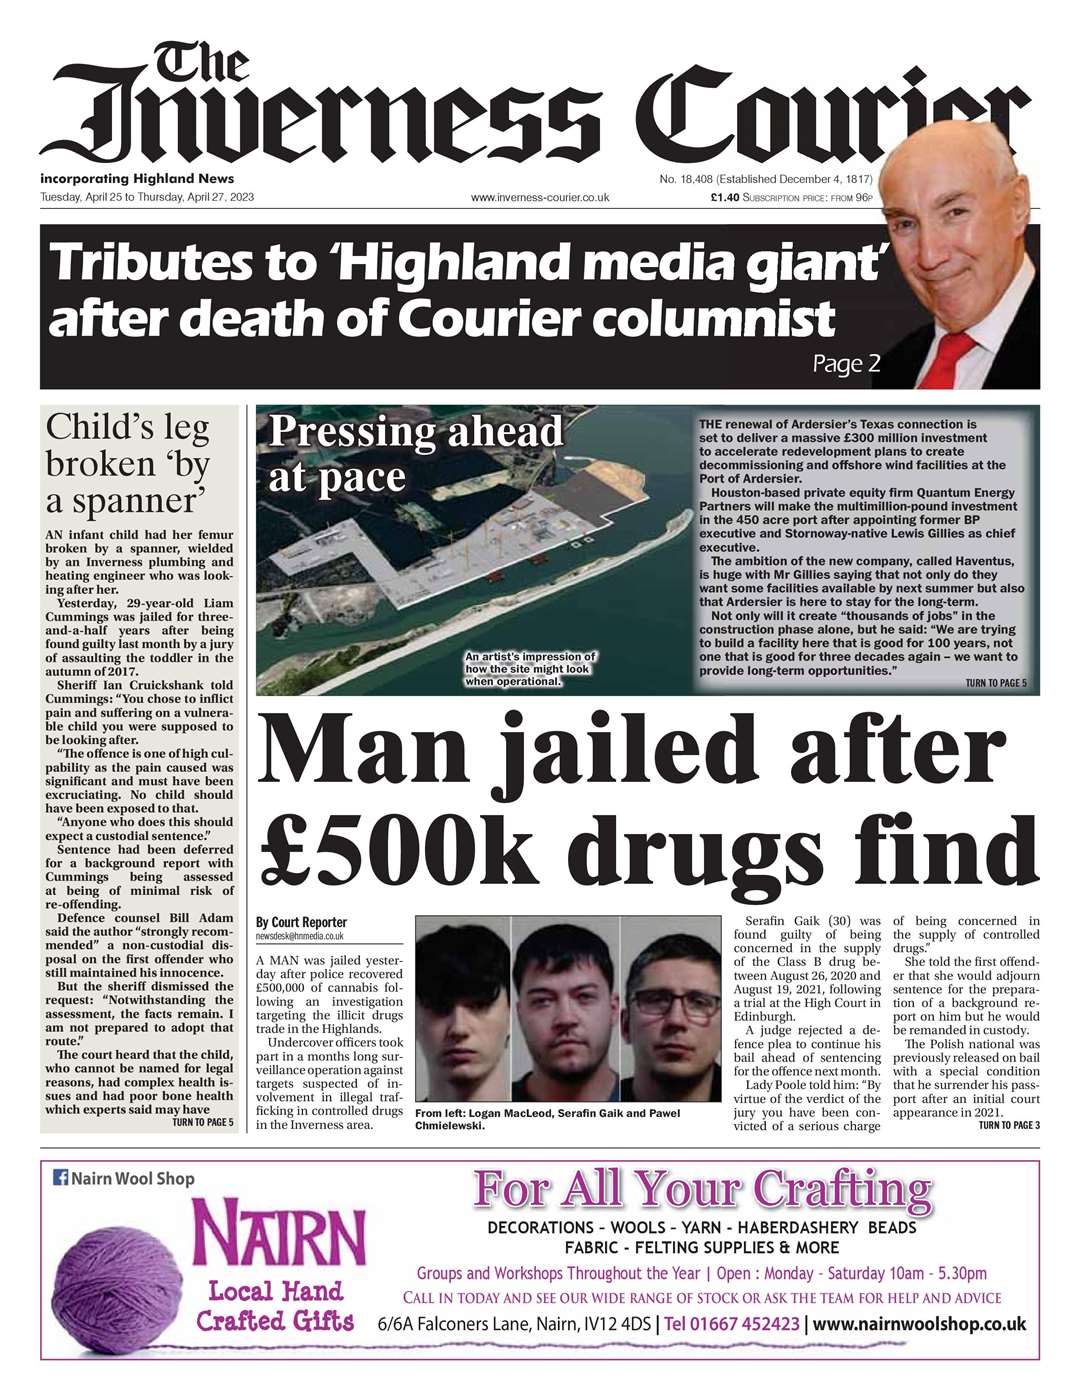 The Inverness Courier, April 25, front page.